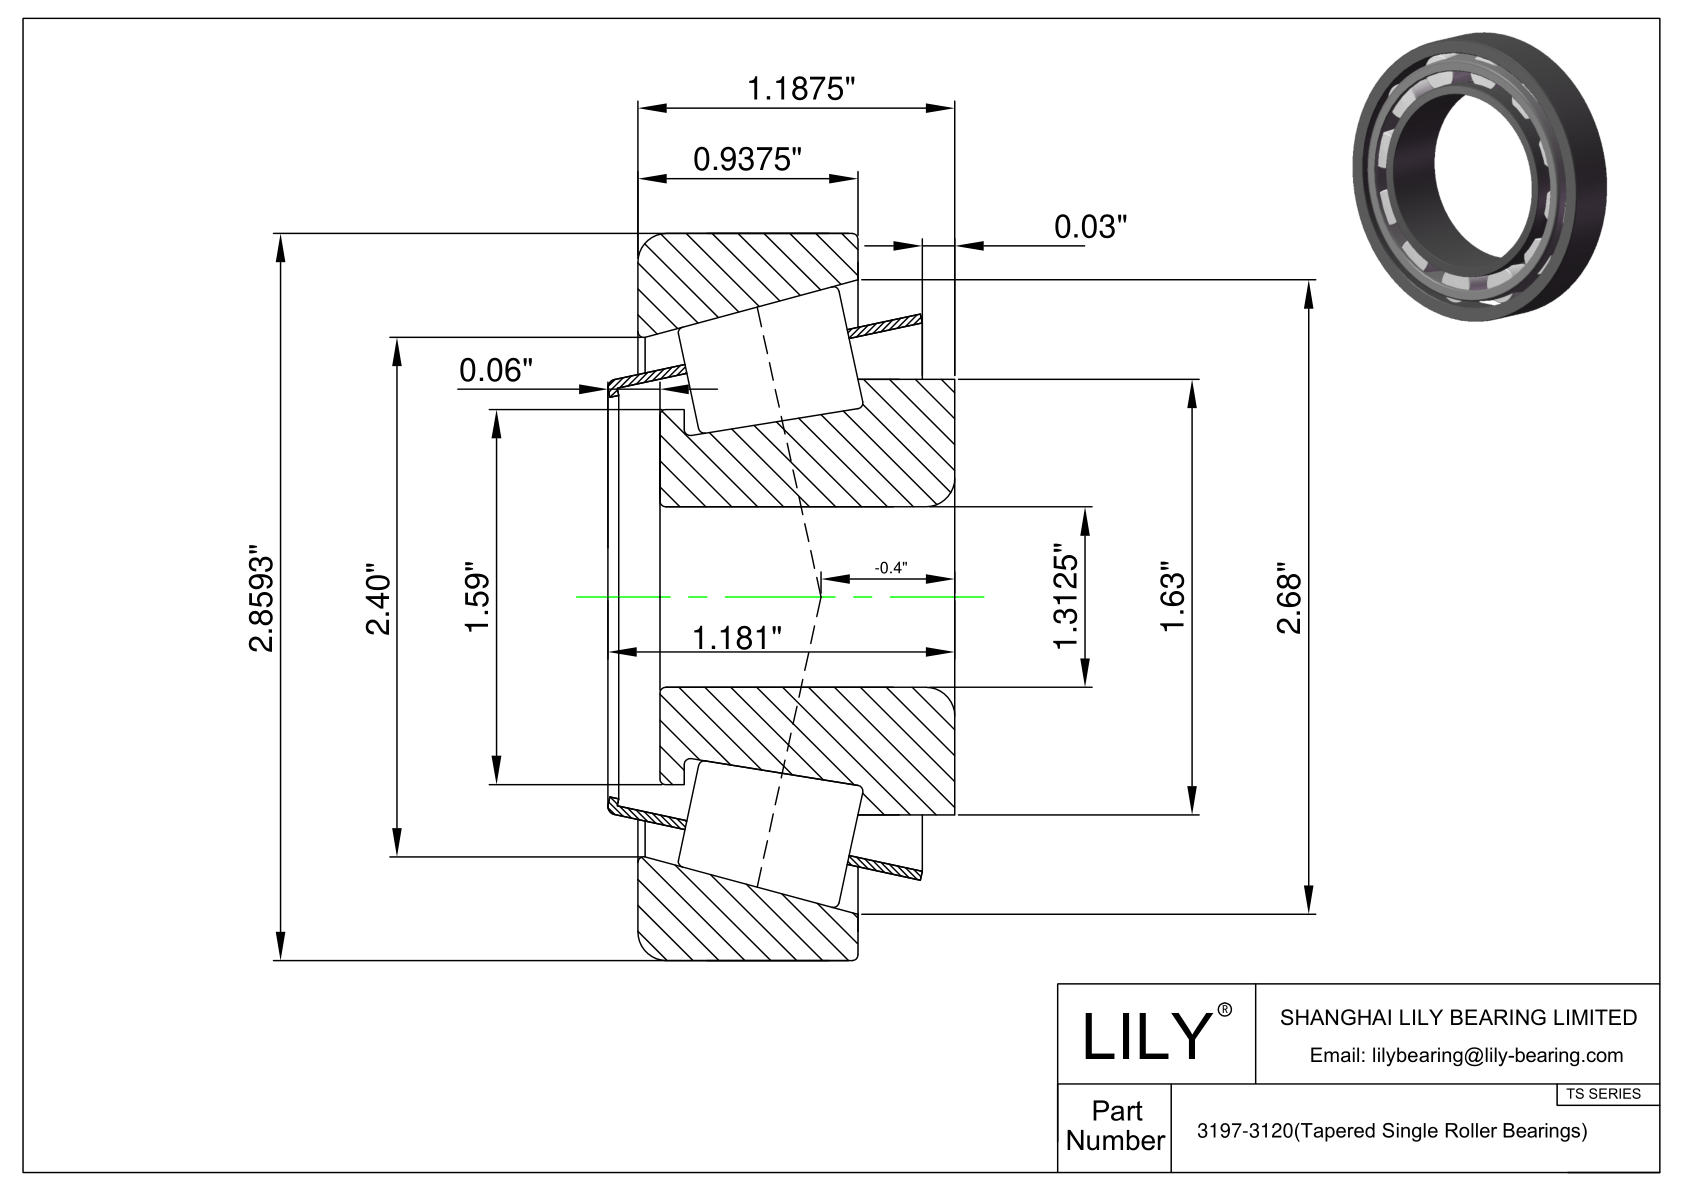 3197-3120 TS (Tapered Single Roller Bearings) (Imperial) cad drawing